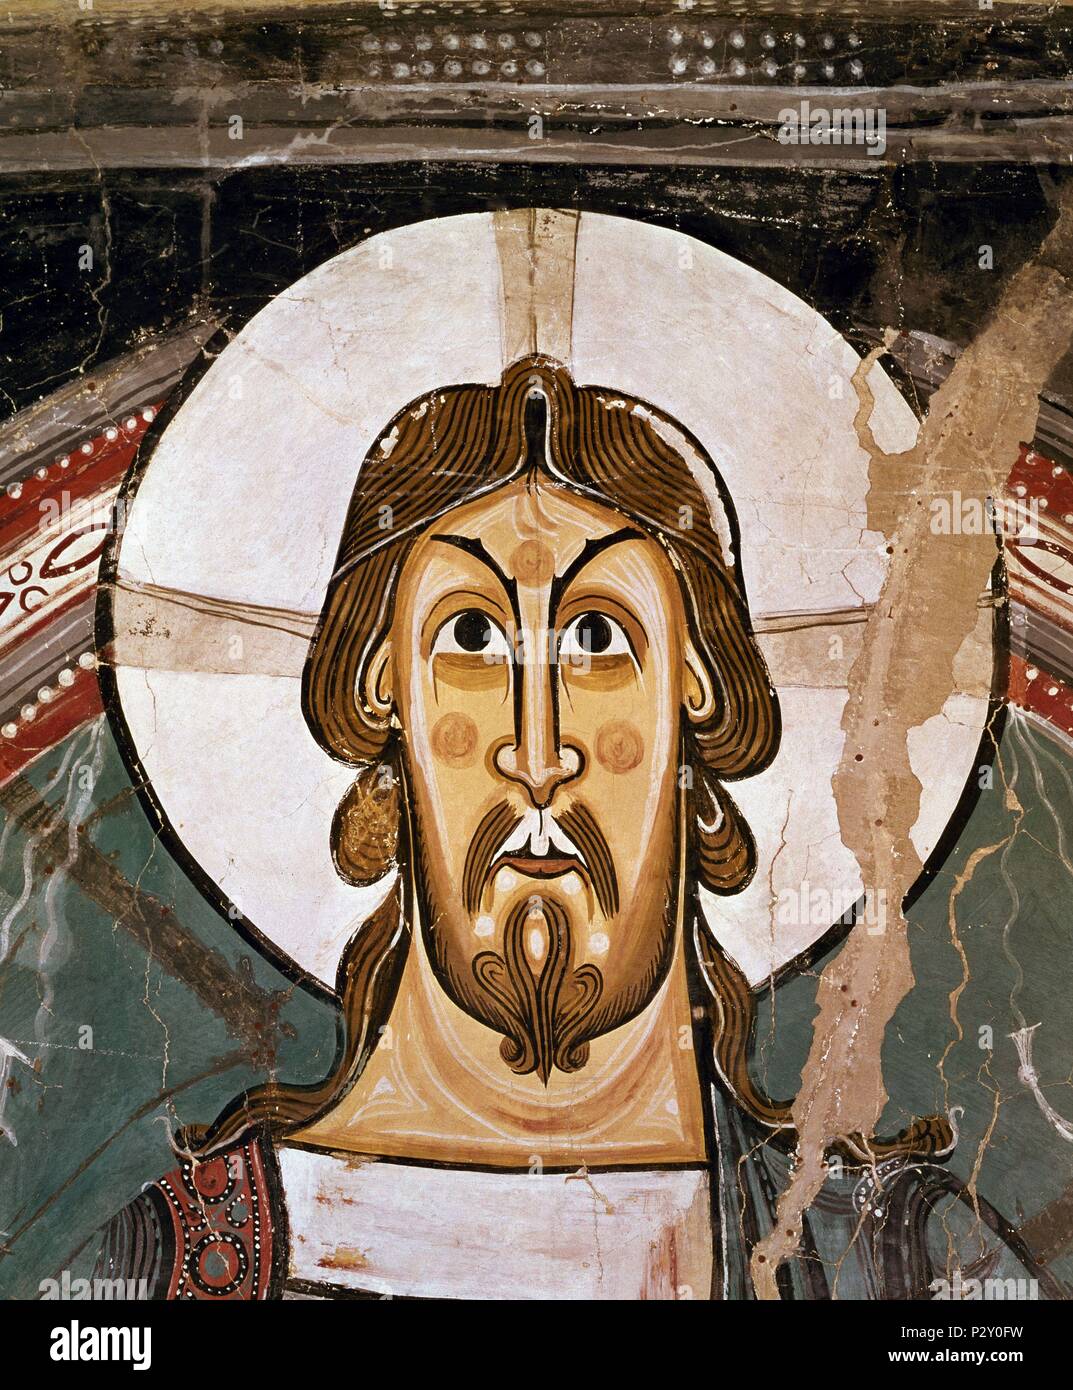 Christ's Face. Detail from the mural on the apse of San Clemente de Tahull. Romanesque art. Barcelona, Cataluna Museum of Art. Author: Master of Taüll (12th cent.). Location: MUSEU NACIONAL D'ART CATALUNYA, BARCELONA, SPAIN. Stock Photo